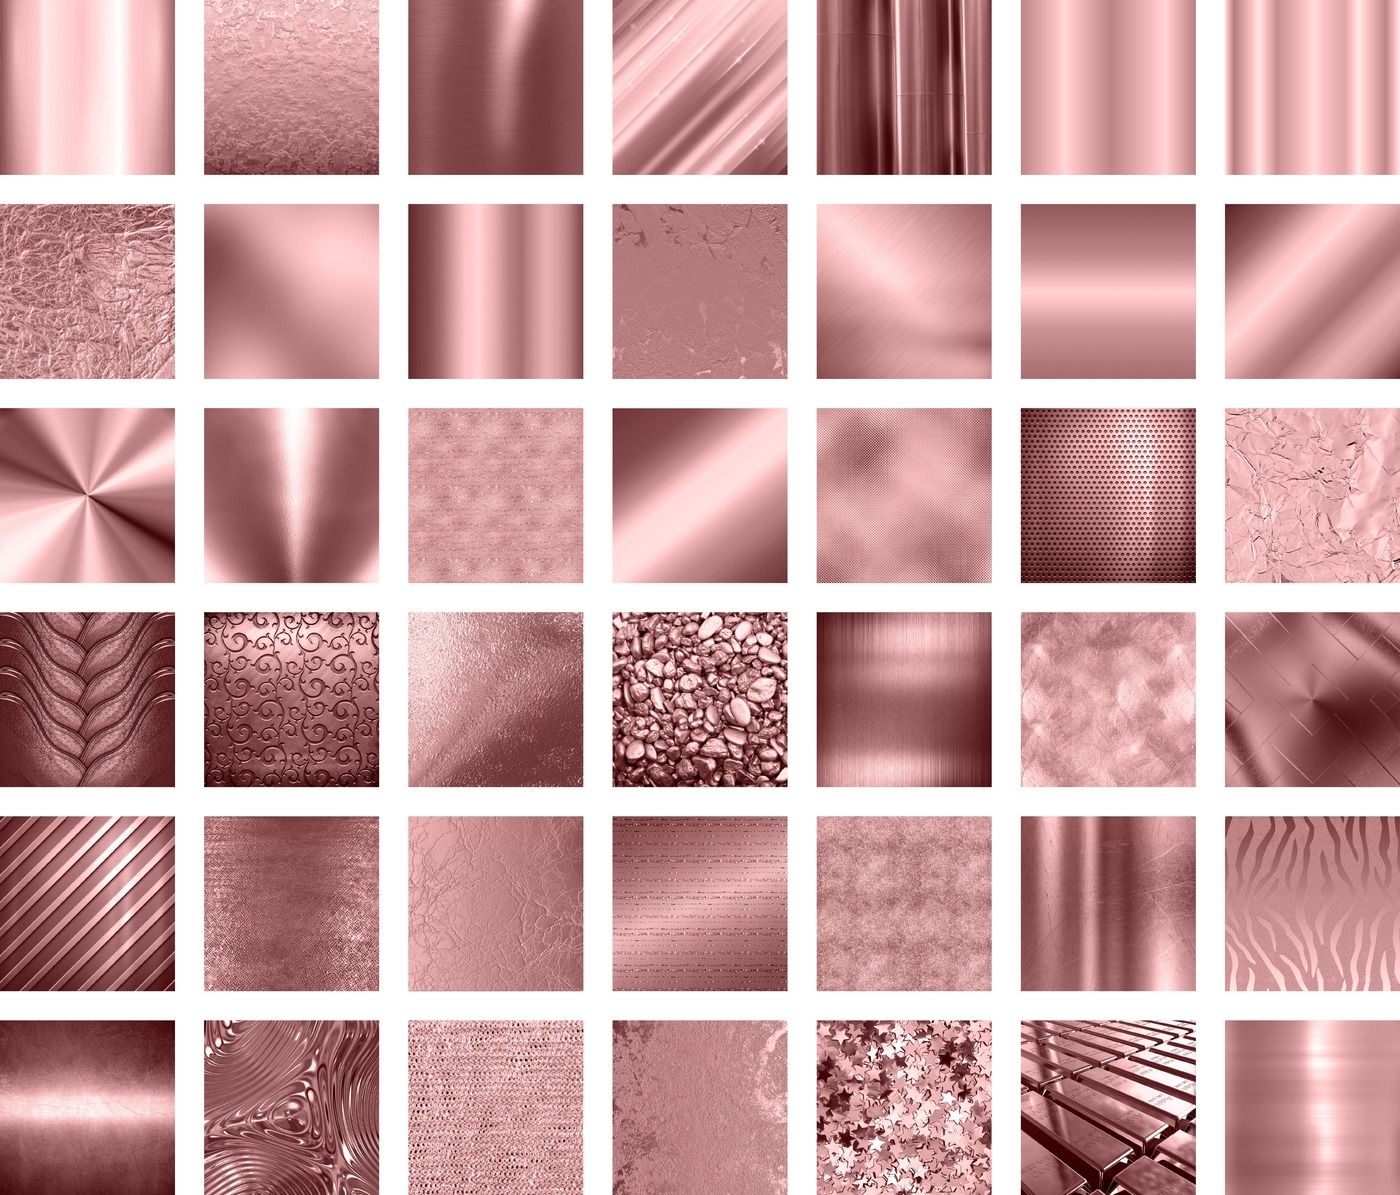 Rose Gold Digital Papers, Rose Gold Textures, Scrapbook Paper, Metallic  Texture for Photoshop, Rose Gold Background, Rose Gold Glitter 